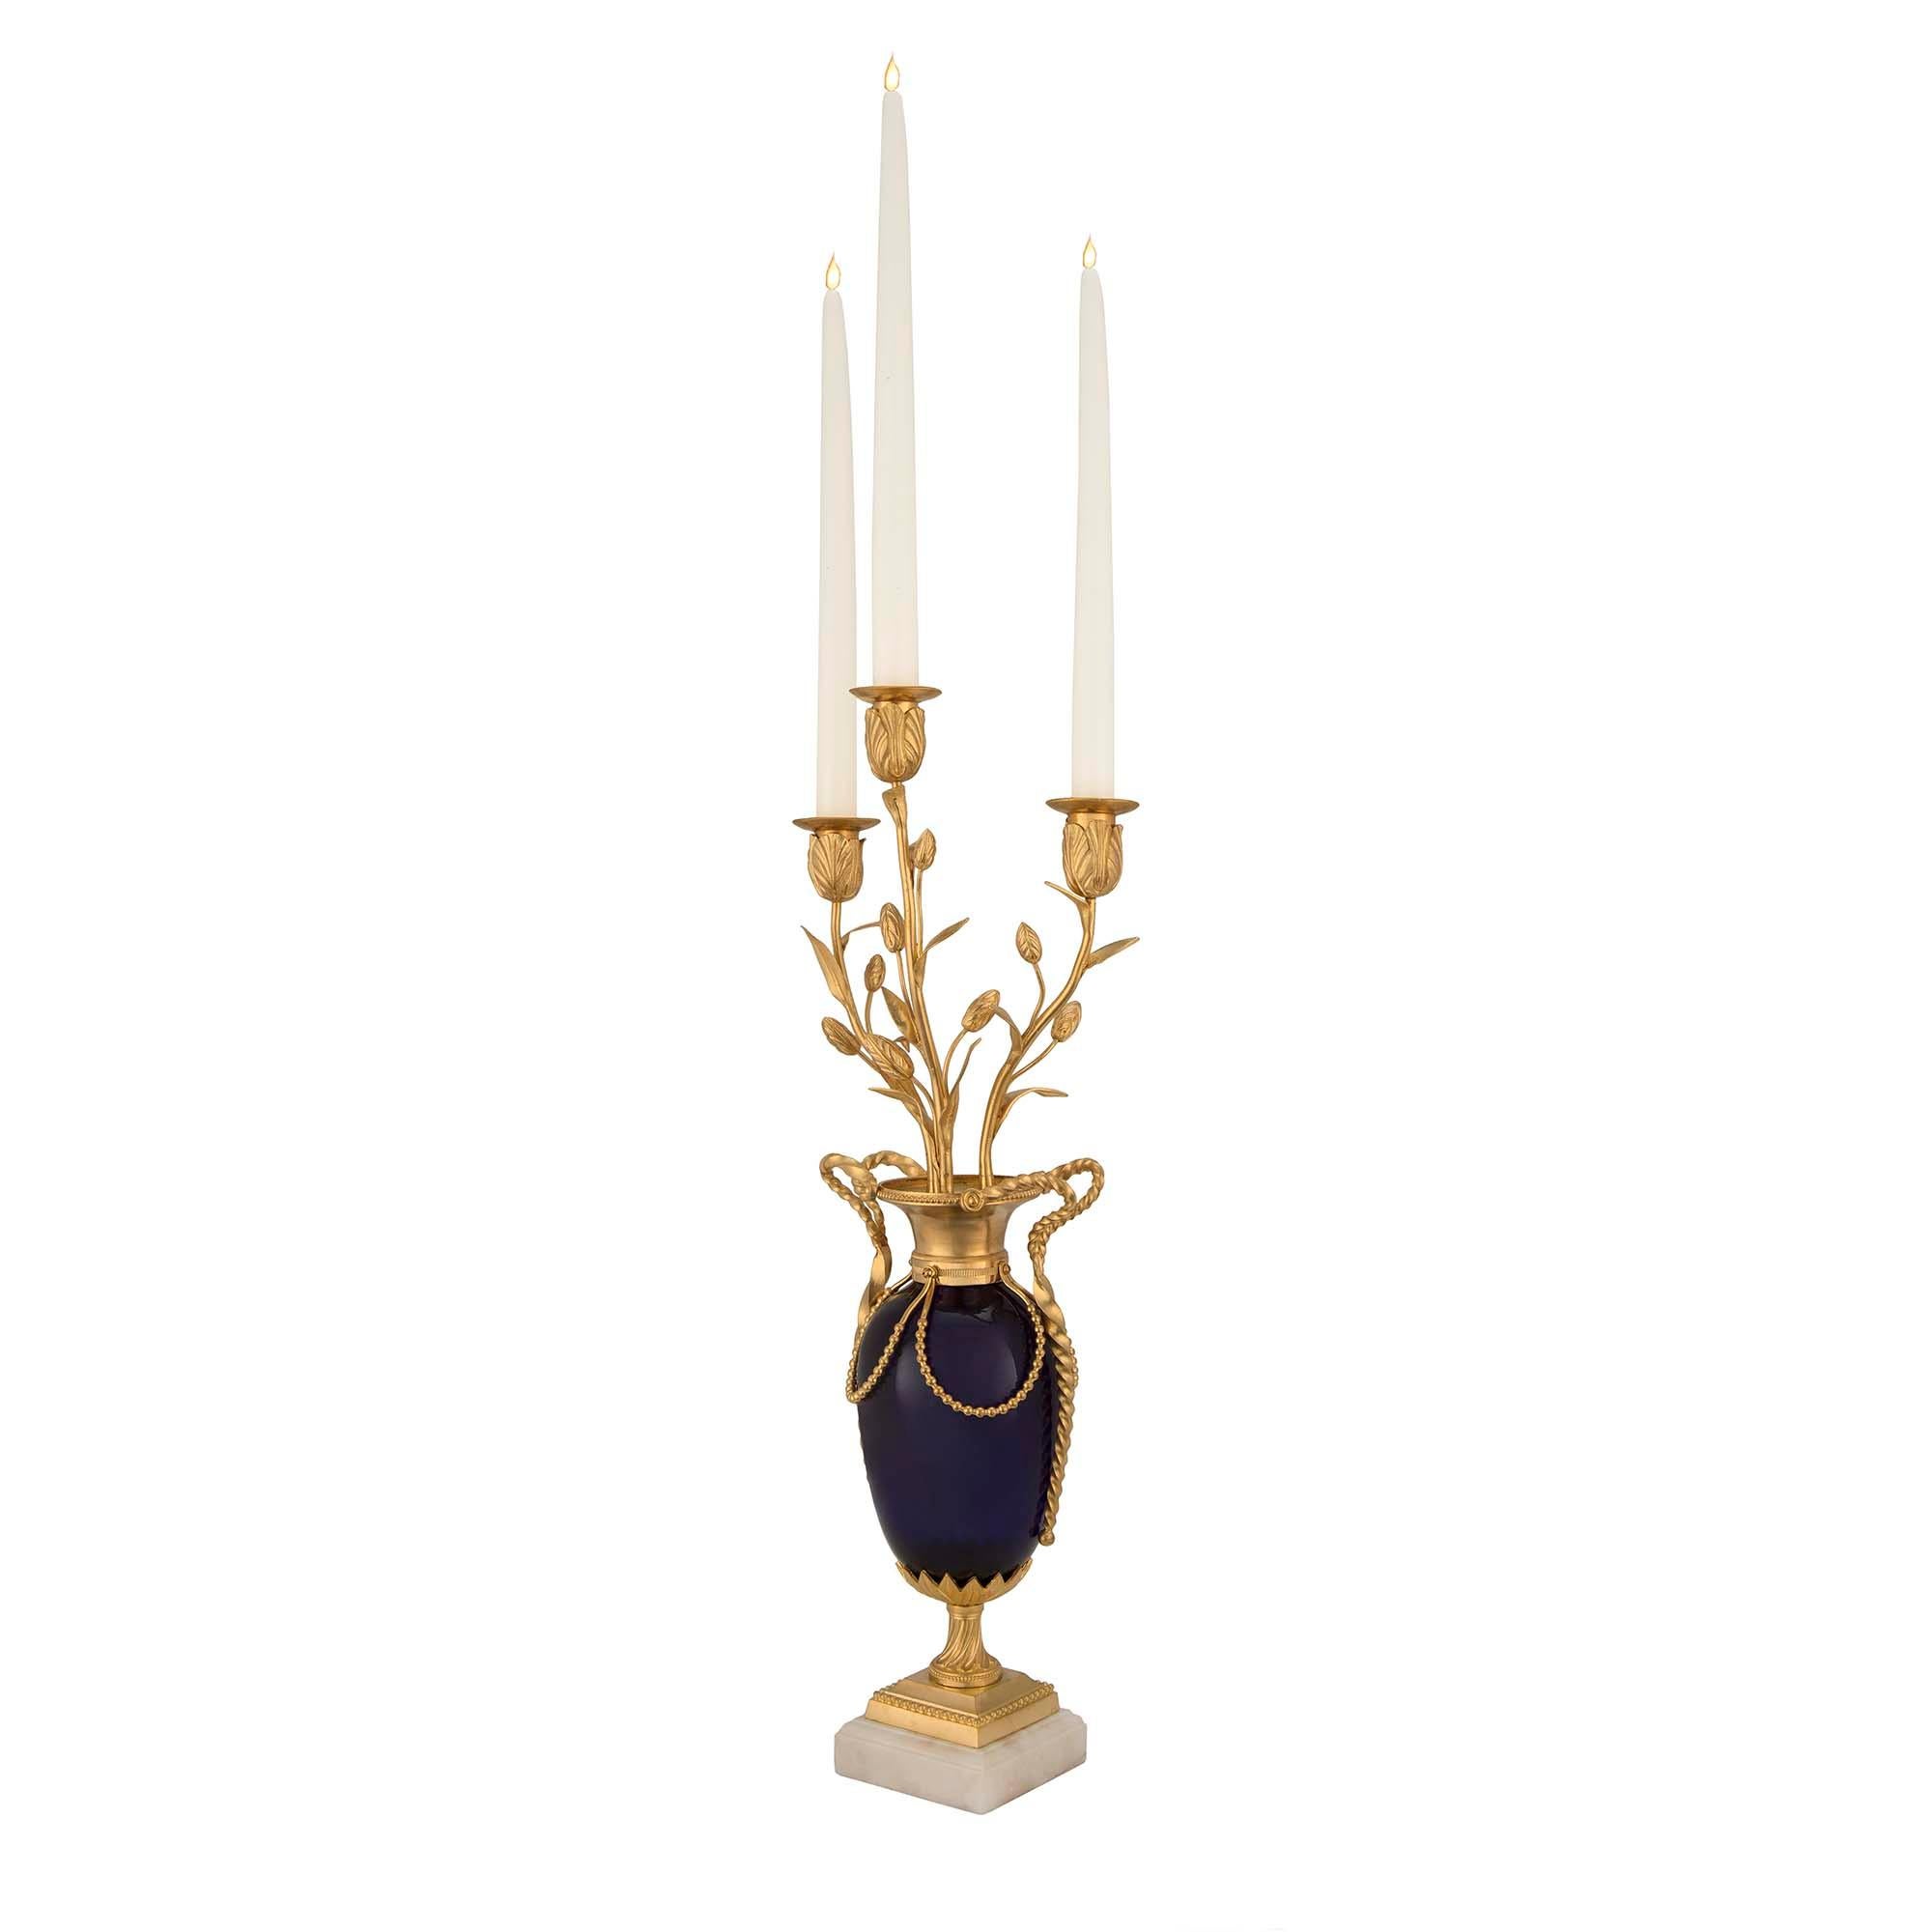 French 19th Century Louis XVI Style Cobalt Blue Glass and Ormolu Candelabras In Good Condition For Sale In West Palm Beach, FL